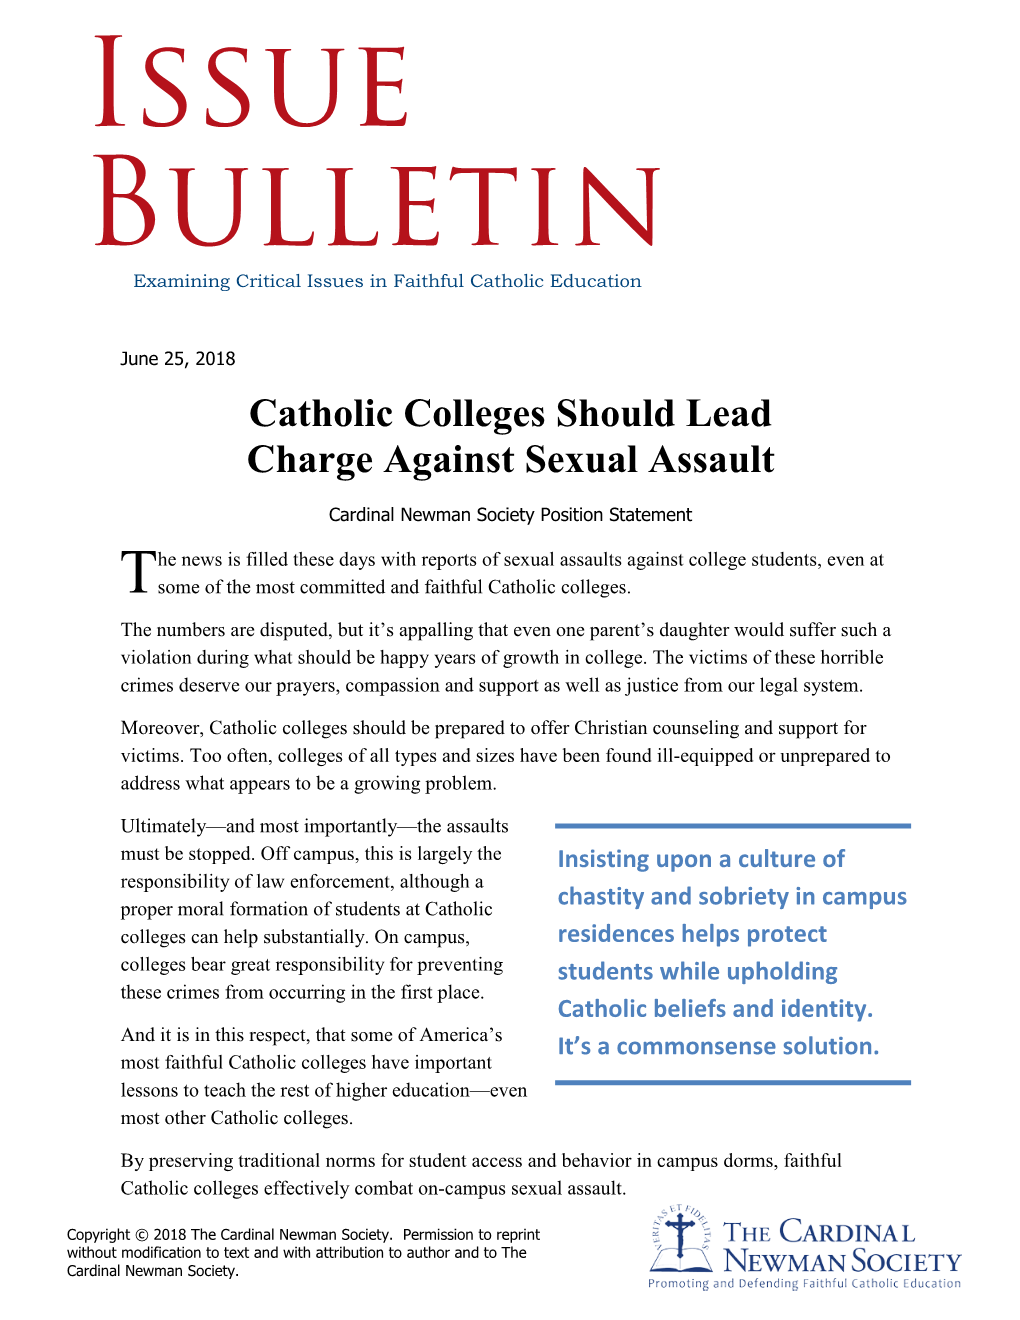 Catholic Colleges Should Lead Charge Against Sexual Assault